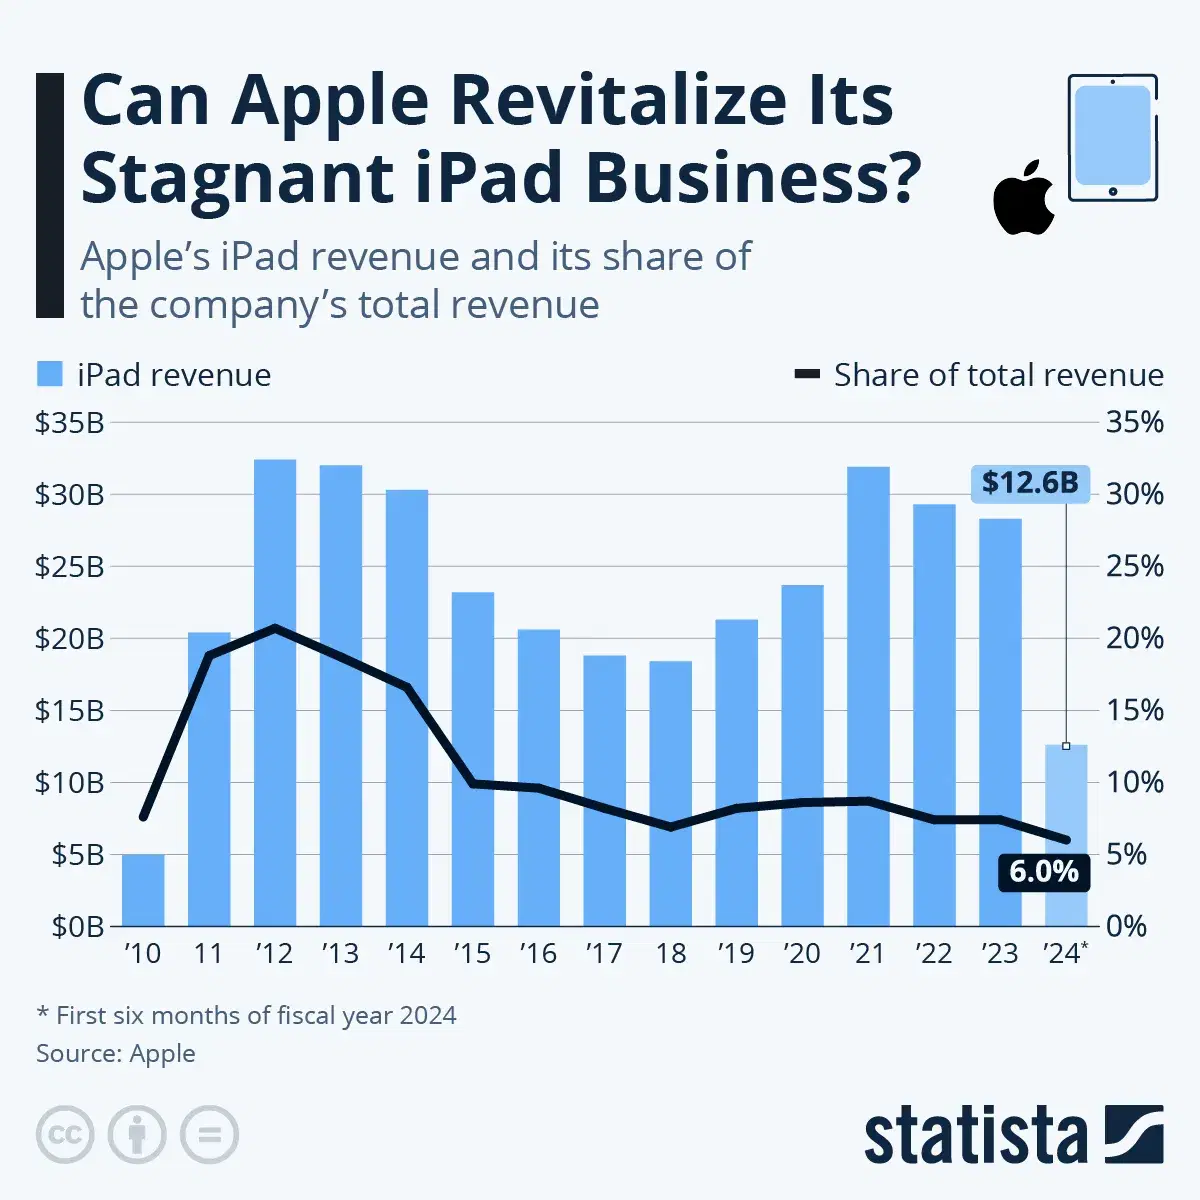 Can Apple Revitalize Its Stagnant iPad Business?